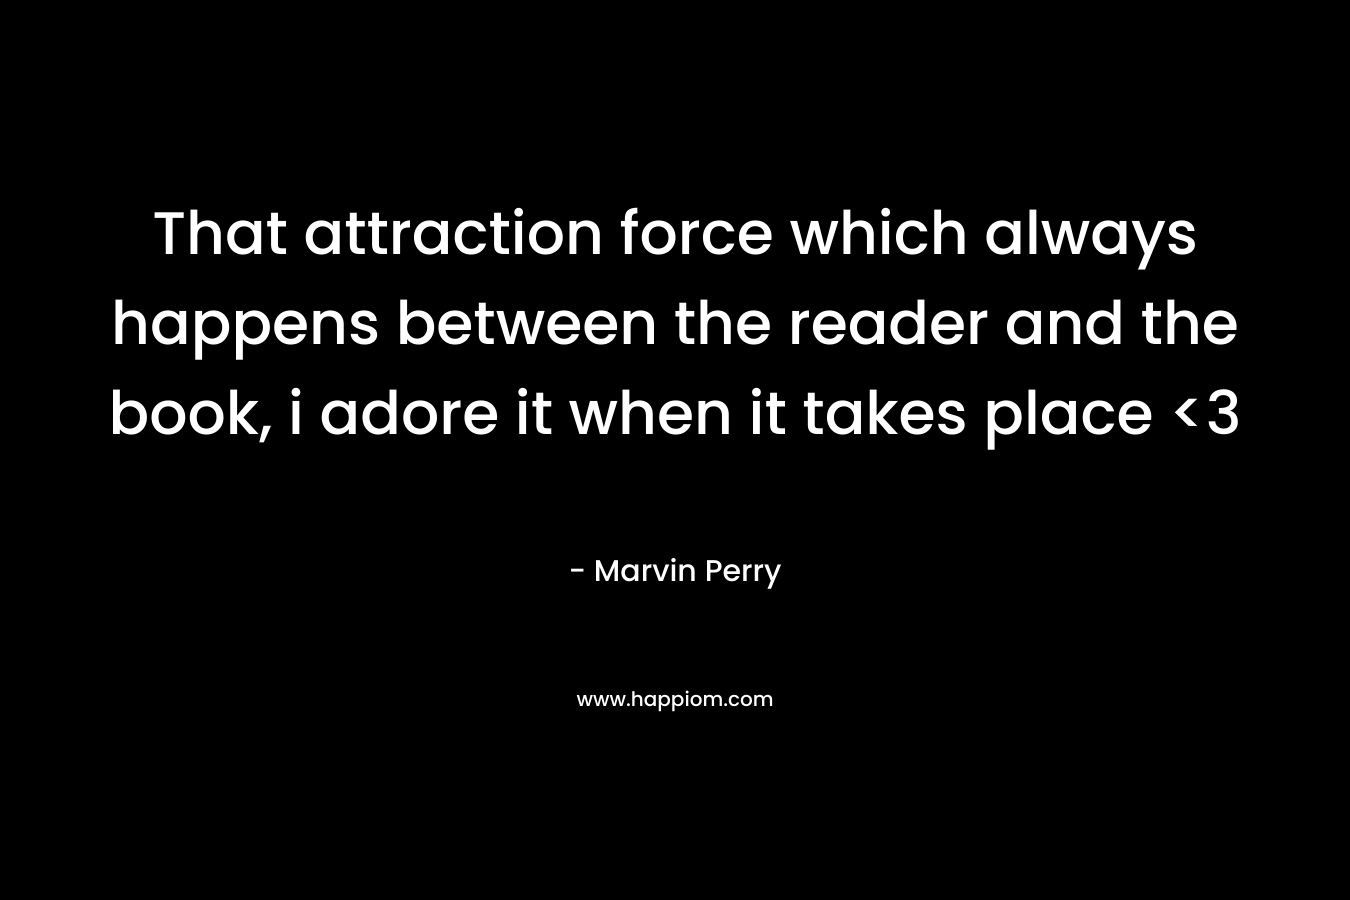 That attraction force which always happens between the reader and the book, i adore it when it takes place